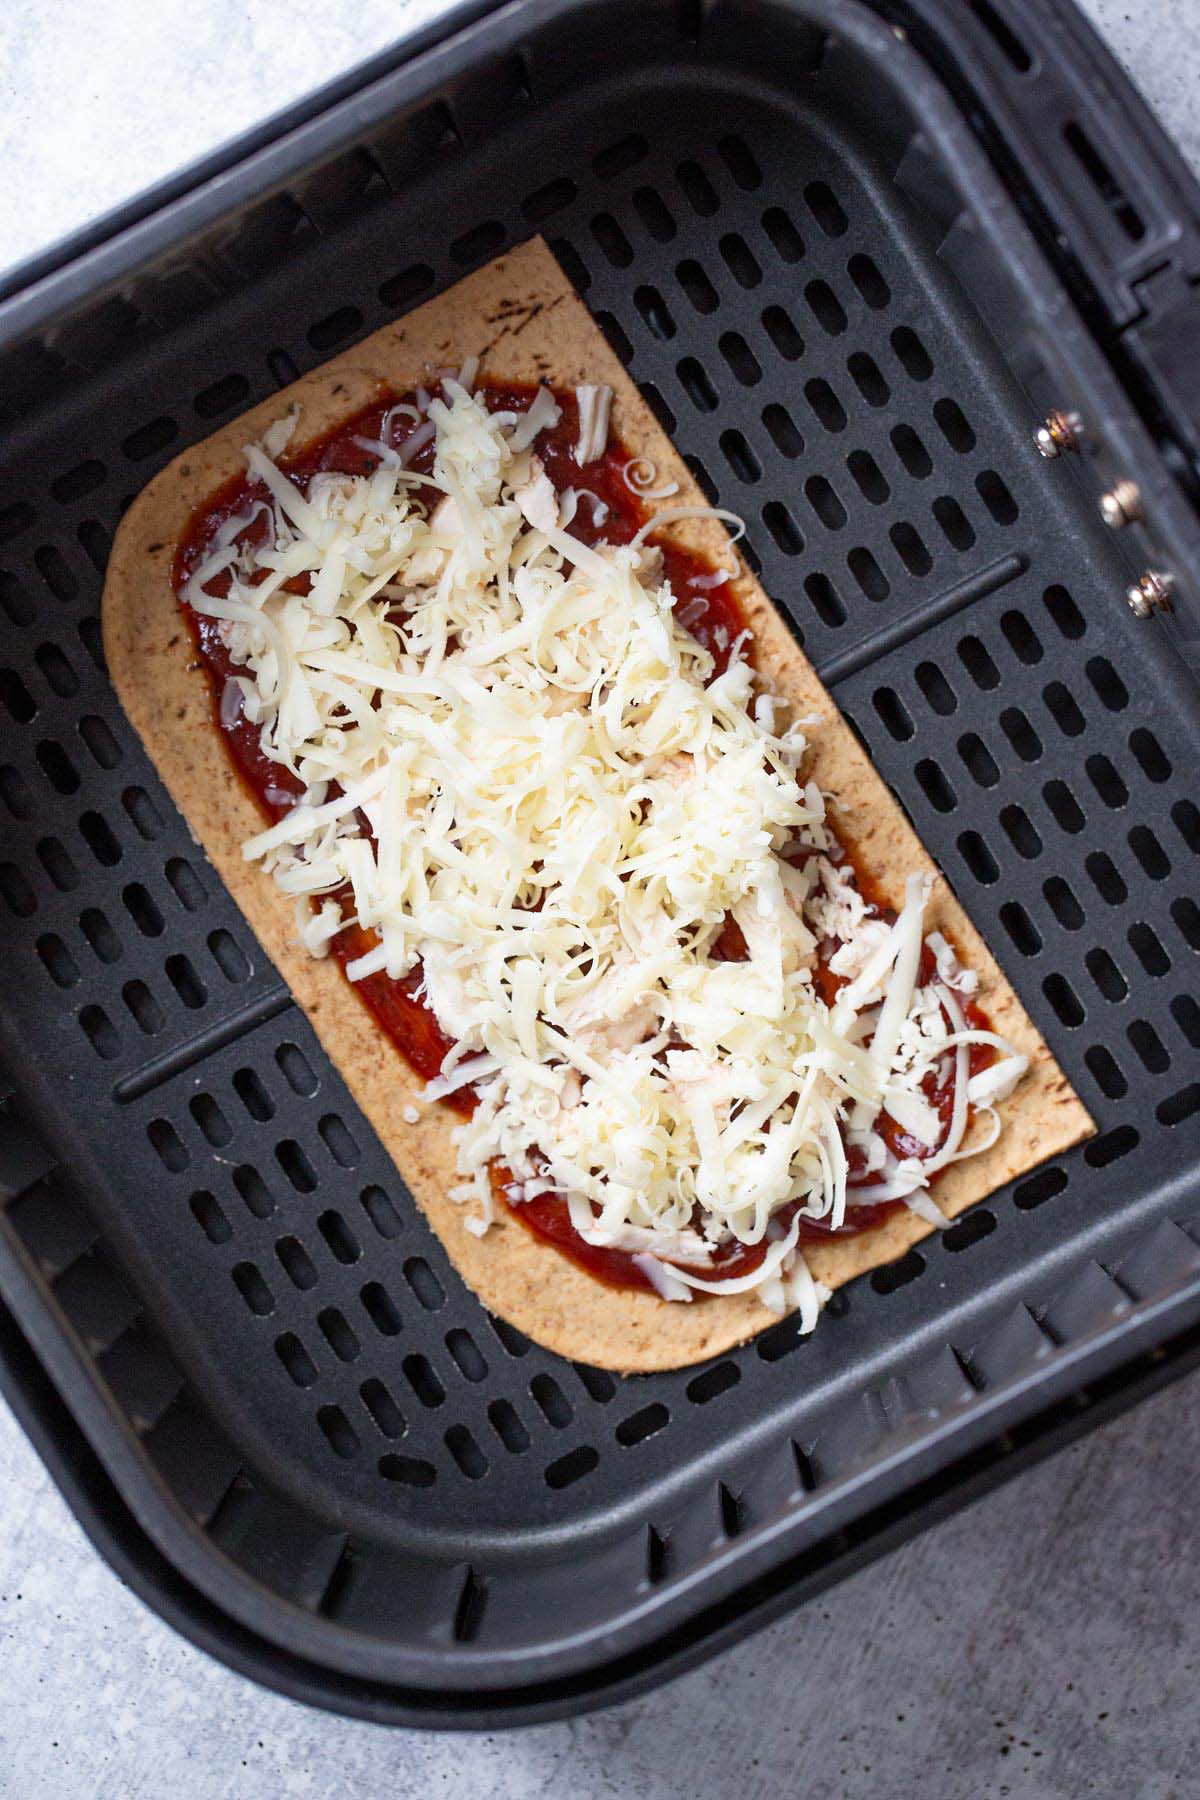 Uncooked pizza in air fryer